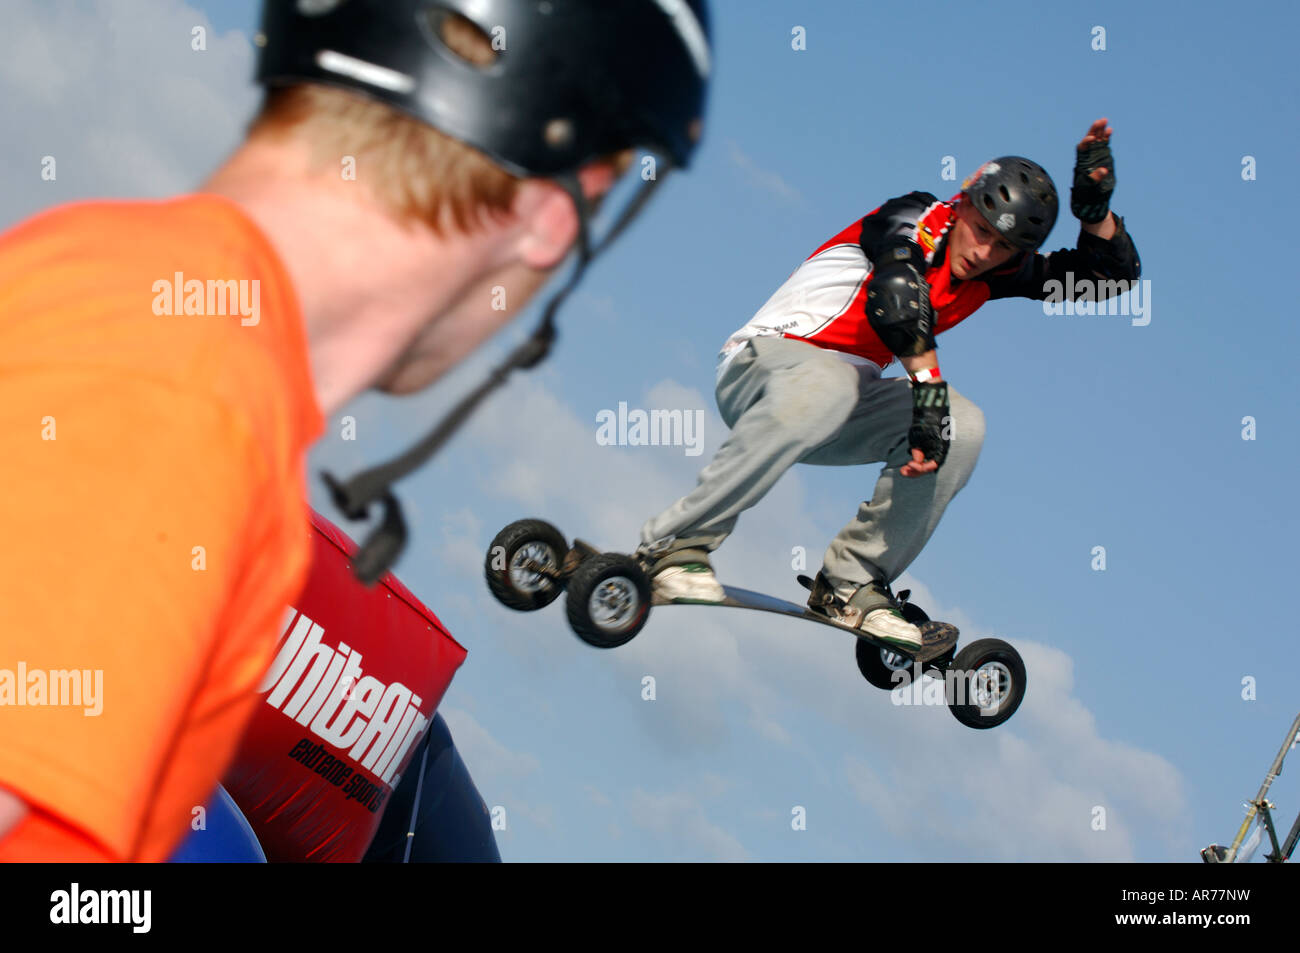 skateboarders mountain boarders wearing protective gear pads and jumping flying through the air doing stunts getting radical Stock Photo